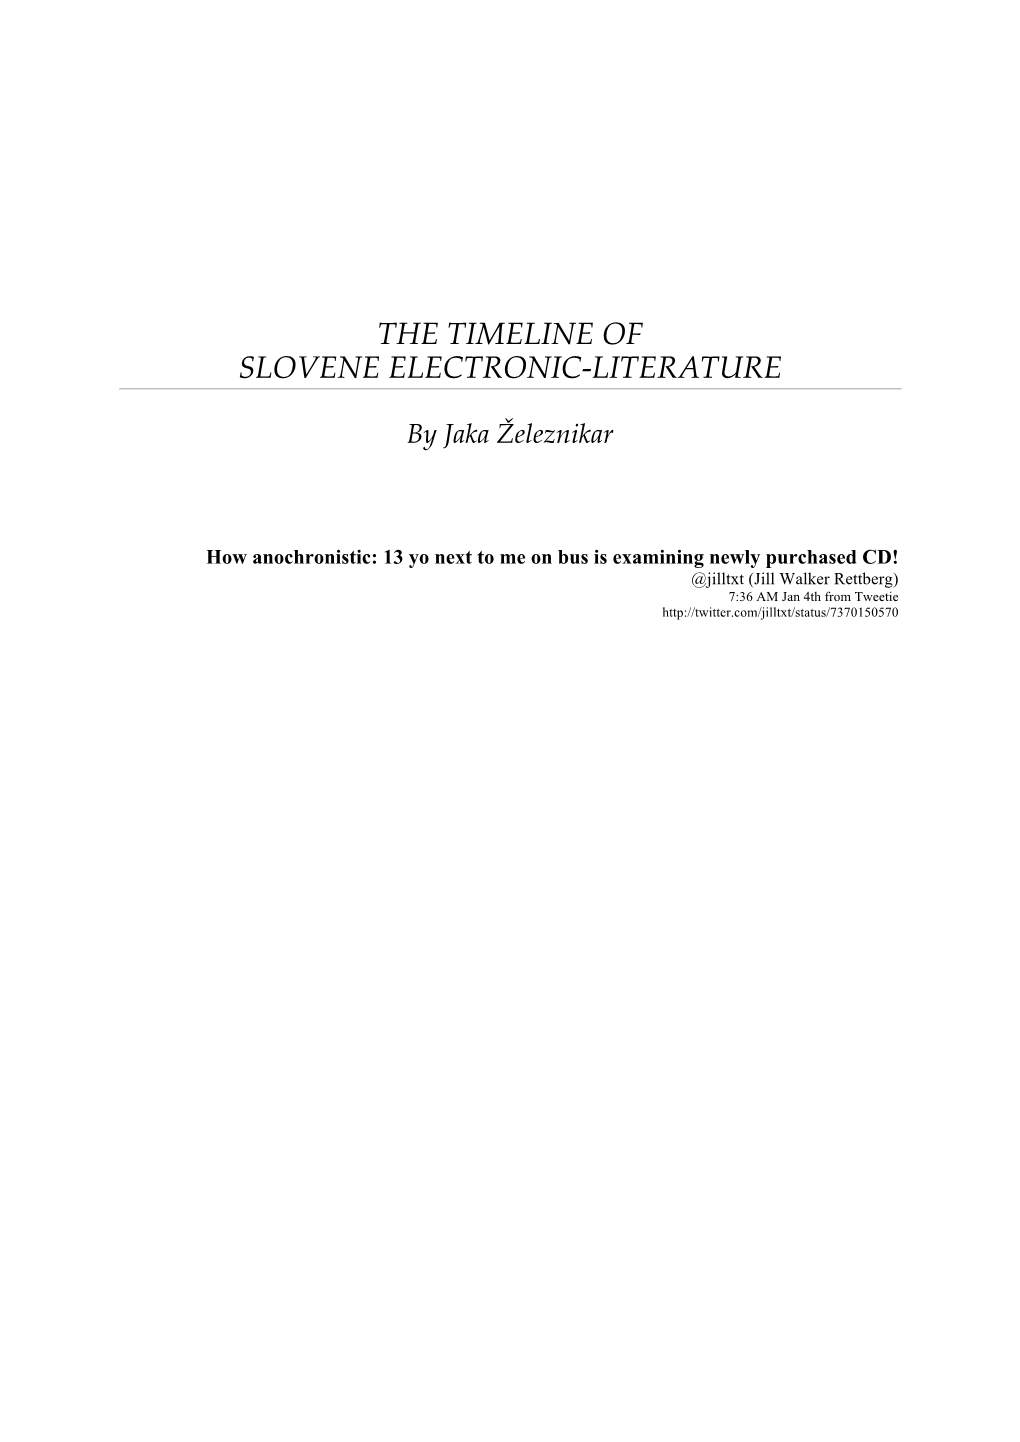 The Timeline of Slovene Electronic-Literature